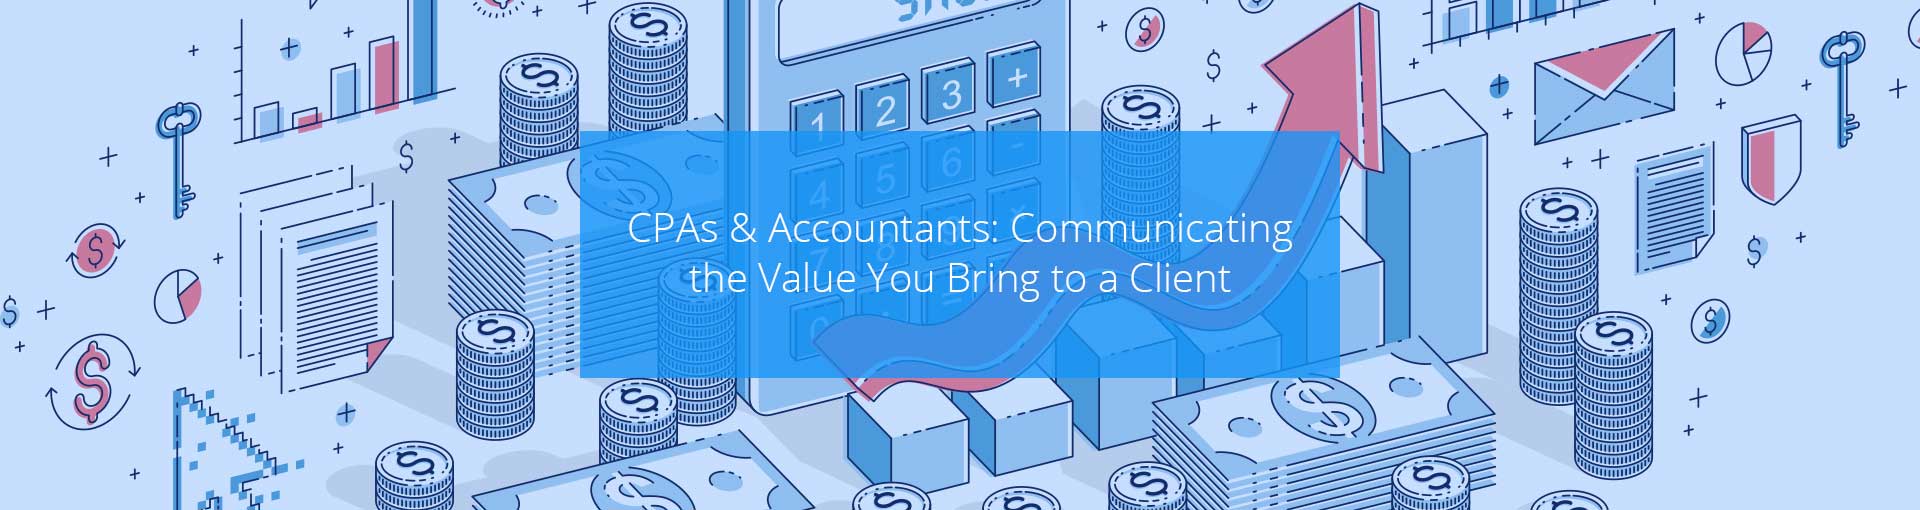 CPAs & Accountants: Communicating the Value You Bring to a Client Featured Image